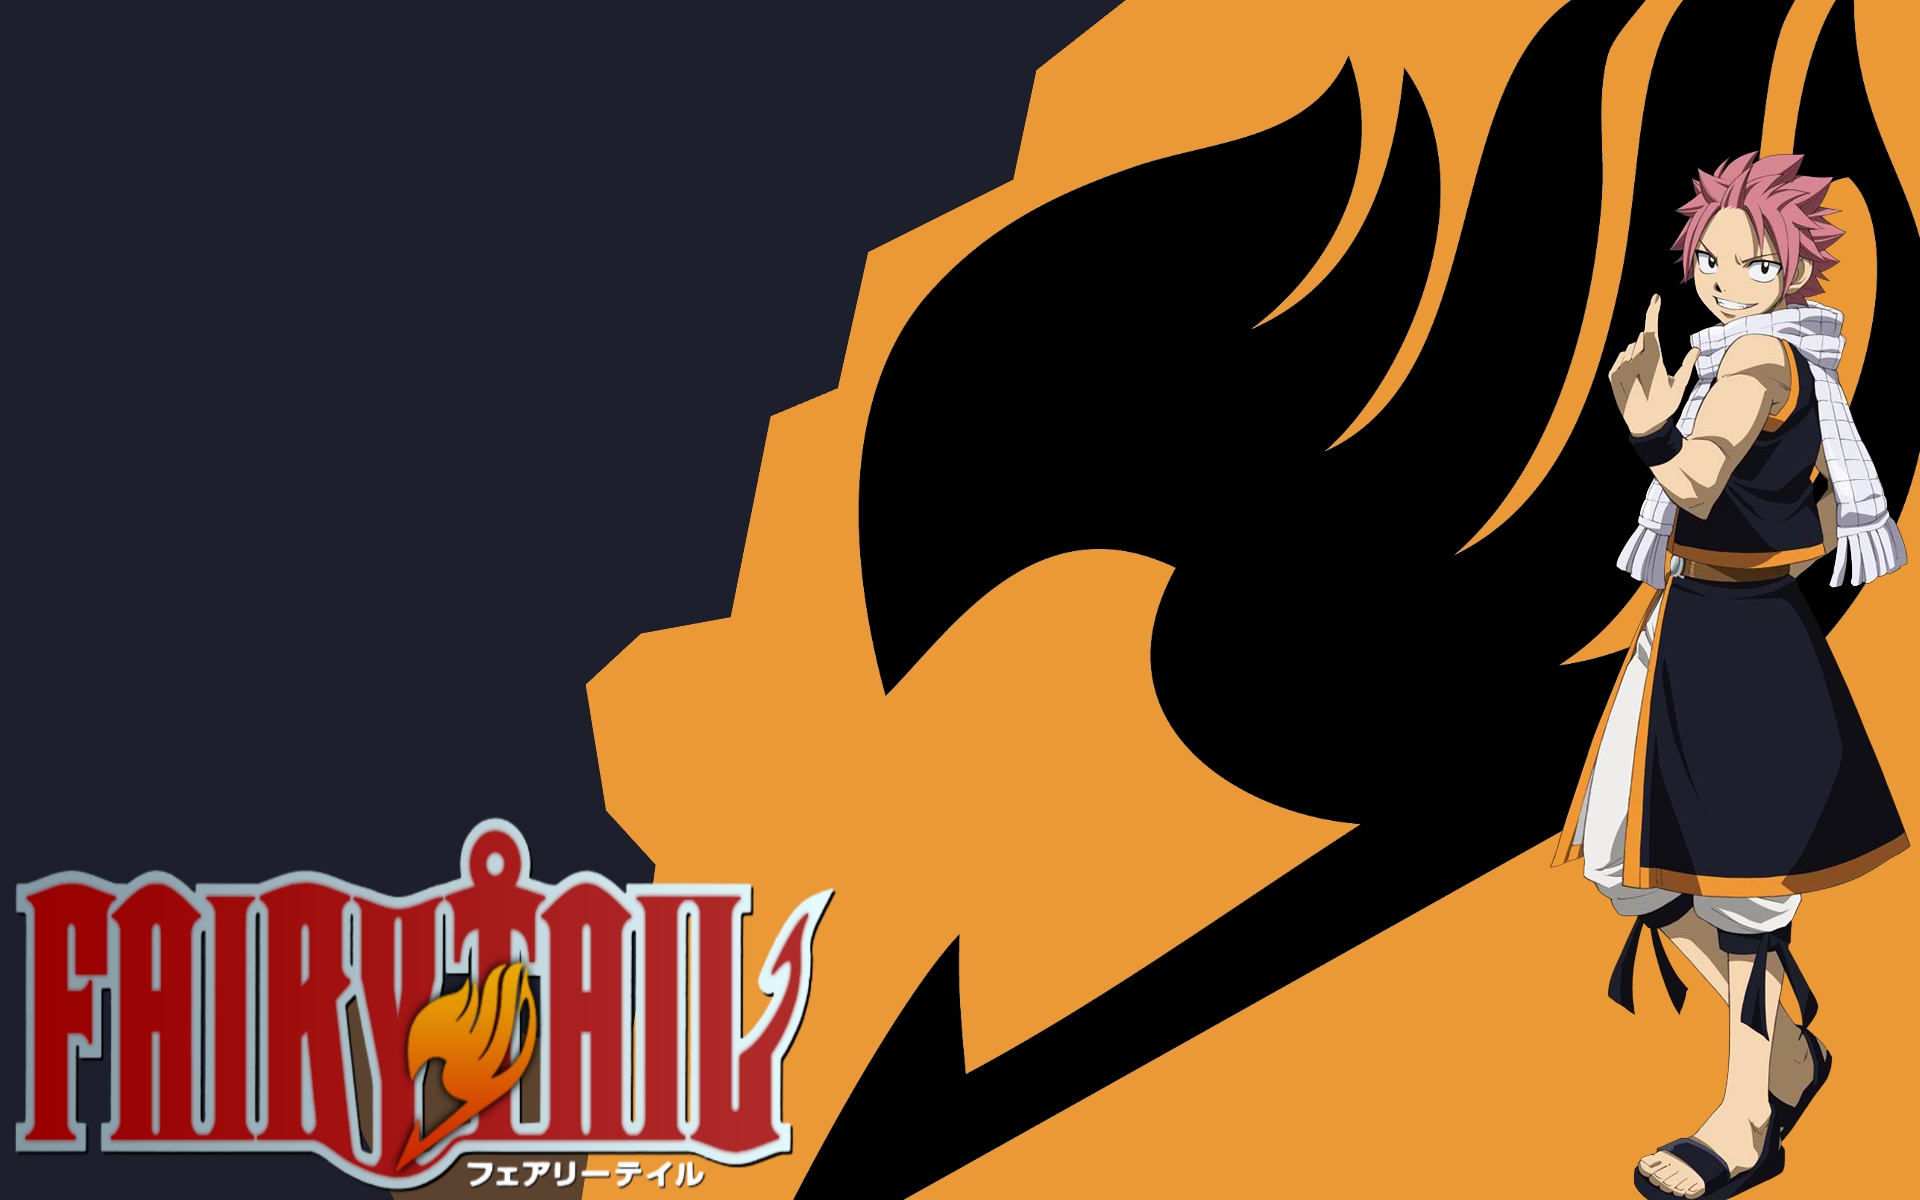 Mainly Faves Fairy Tail Wallpaper by coolkat122 on DeviantArt